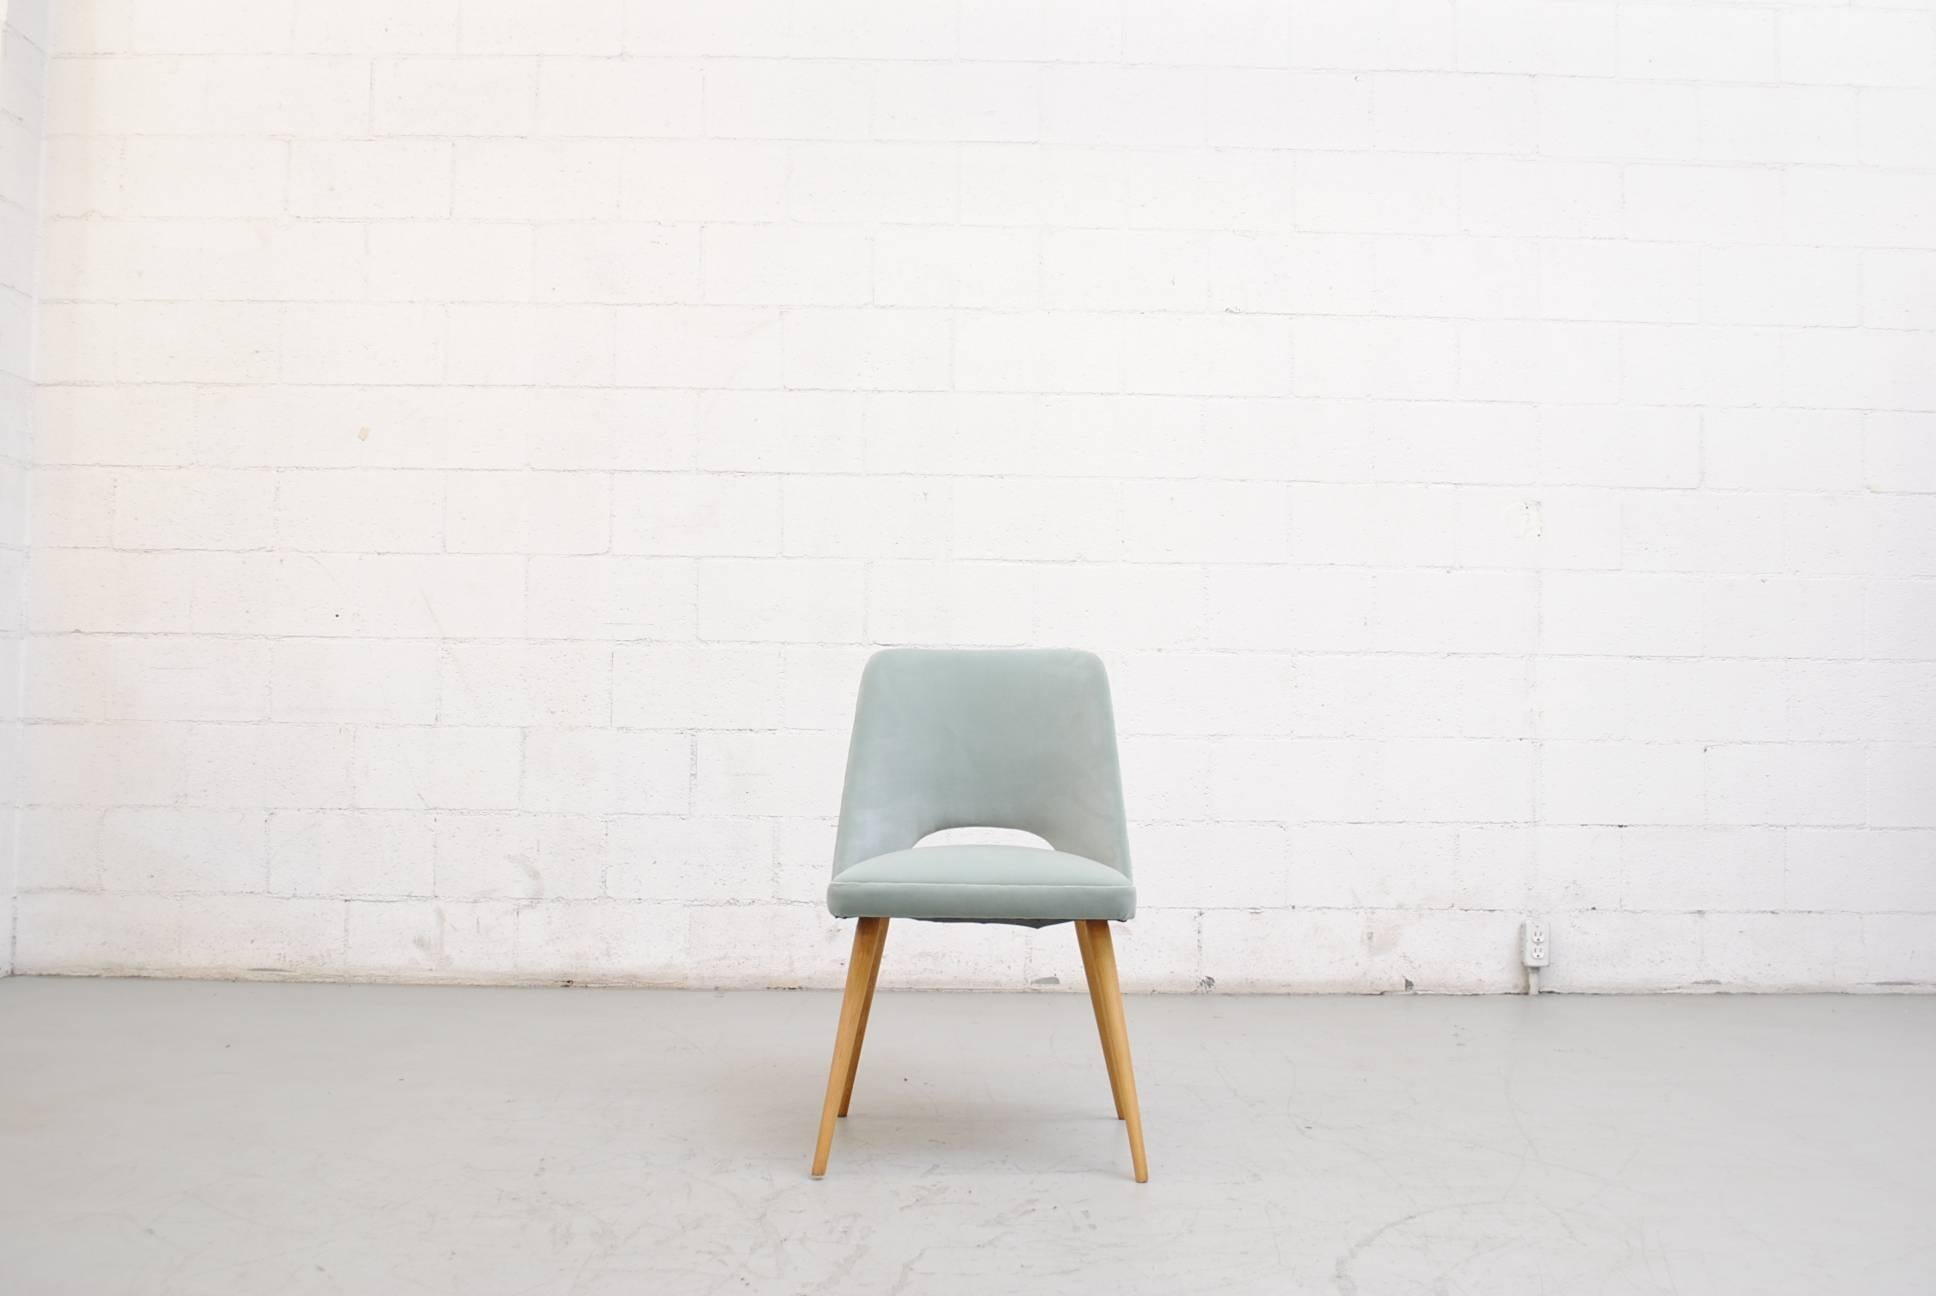 Dutch, mid-century modern dining or cocktail chair. Designed in a style that's very reminiscent of Finnish designing great Eero Saarinen. The chair has handsomely tapered blonde wood legs and has been newly upholstered in lovely teal velvet. In good